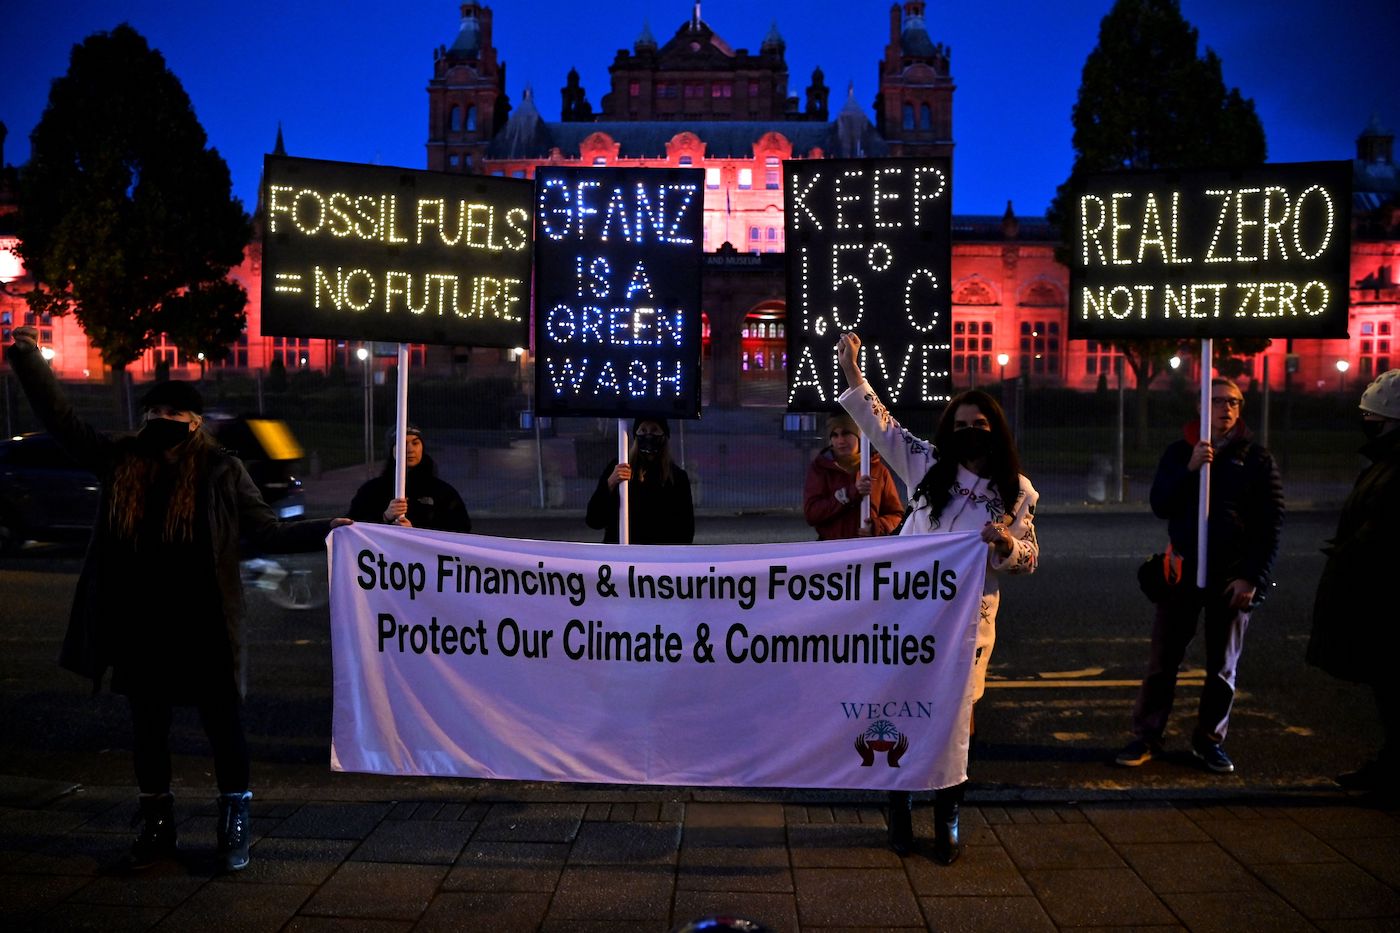 Protesters at night with signs that say "fossil fuels equal no futre" and "GFANZ is a green wash" and "keep 1.5 degrees alive" and "real zero not net zero"